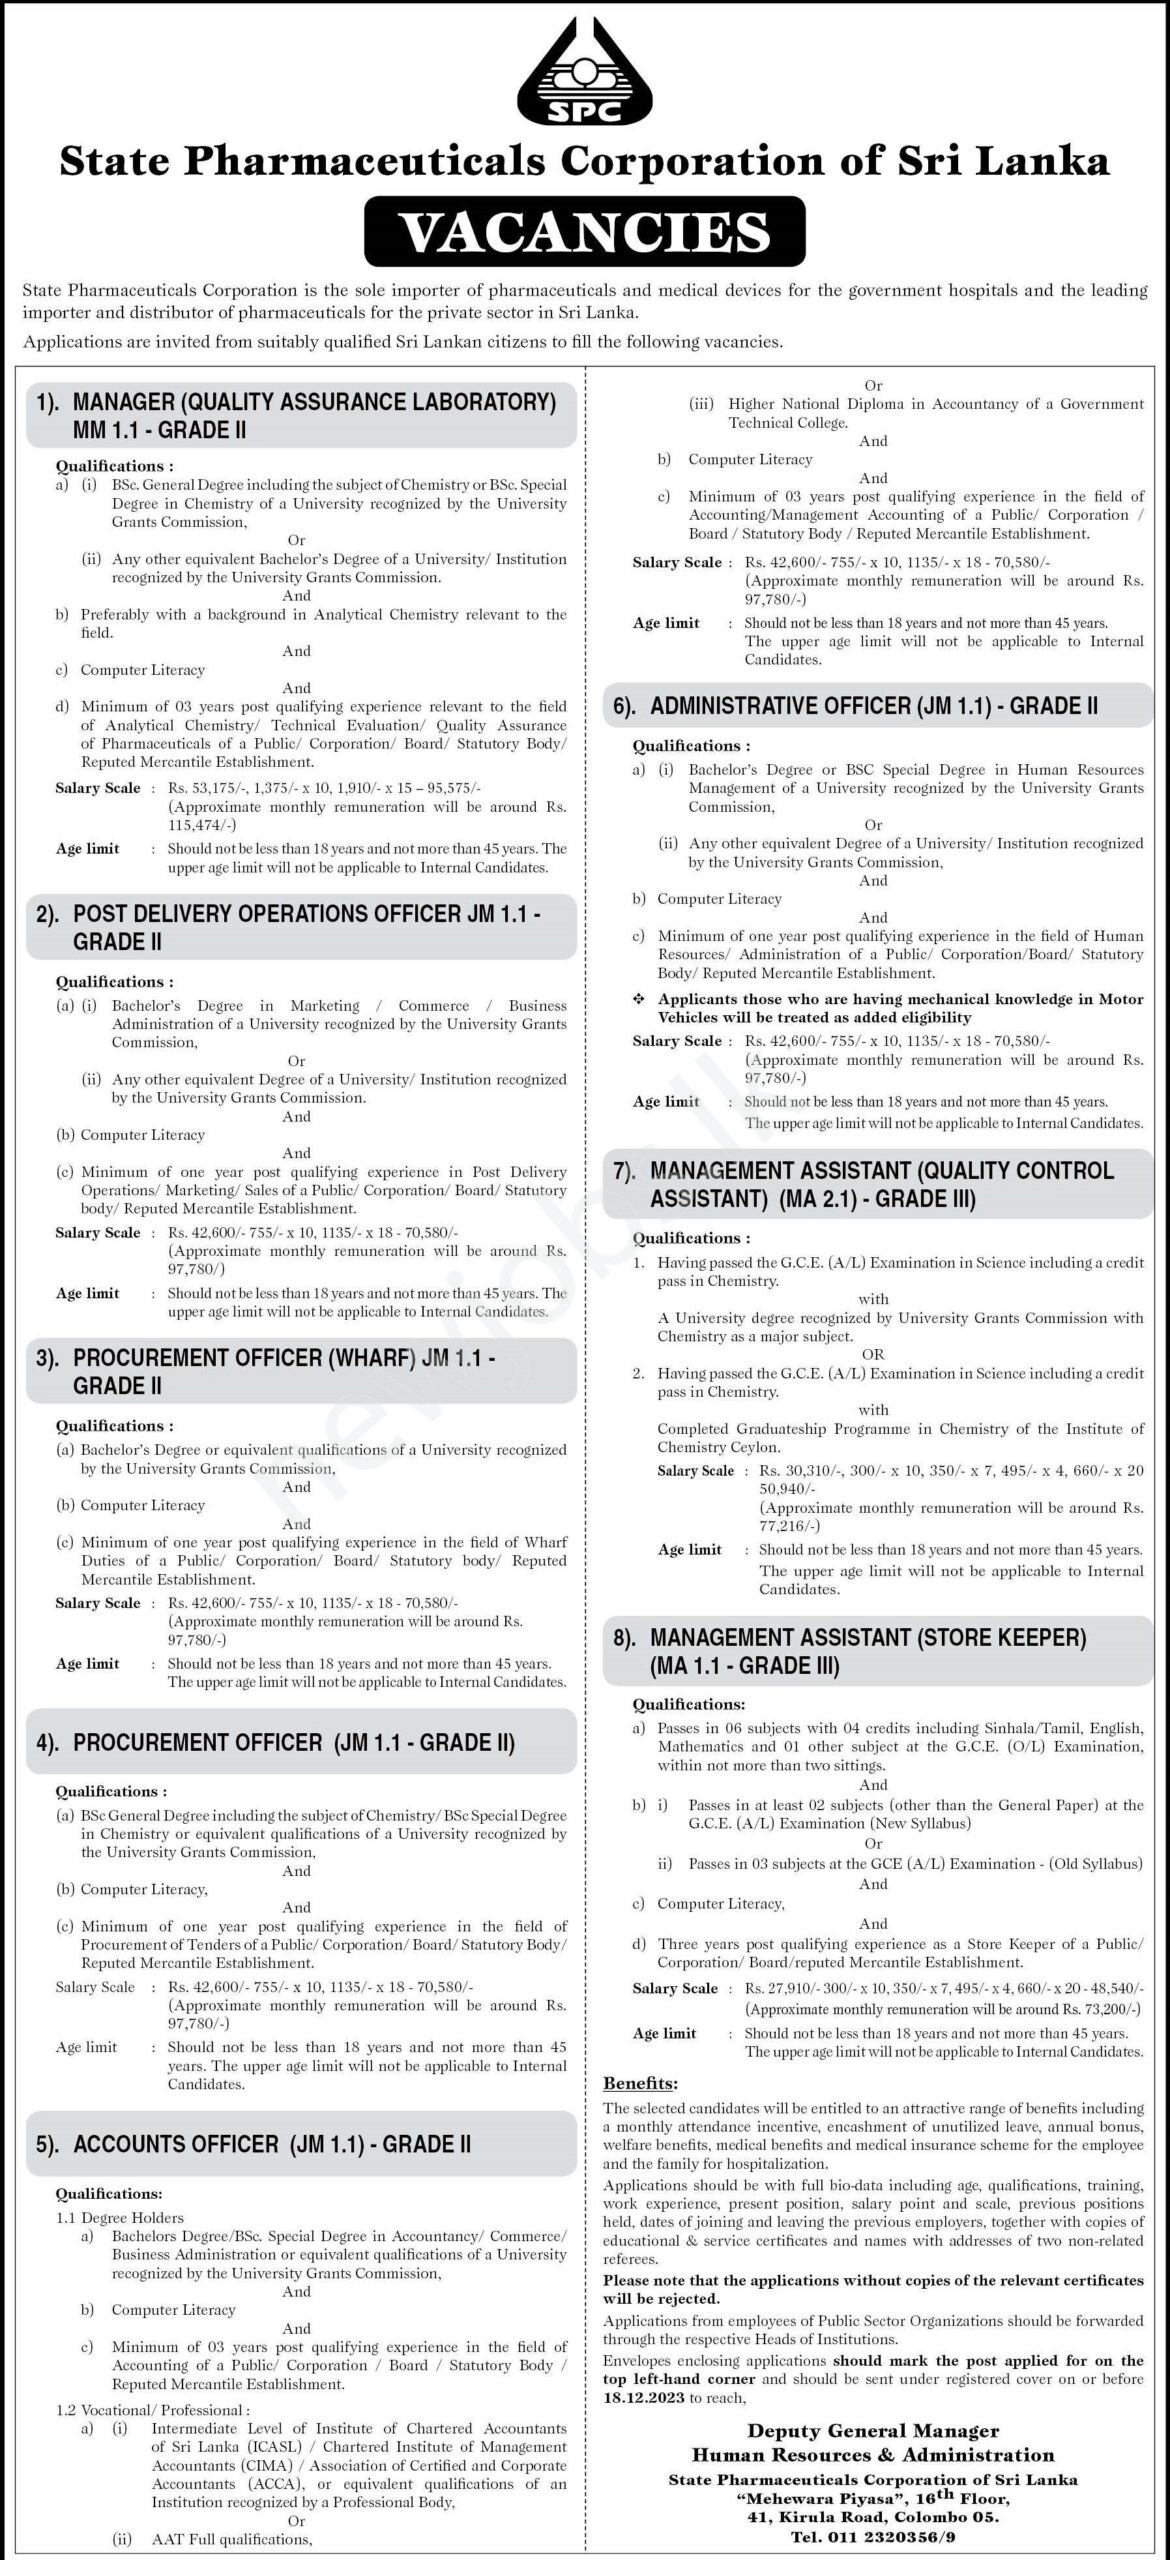 You are currently viewing Procurement Officer